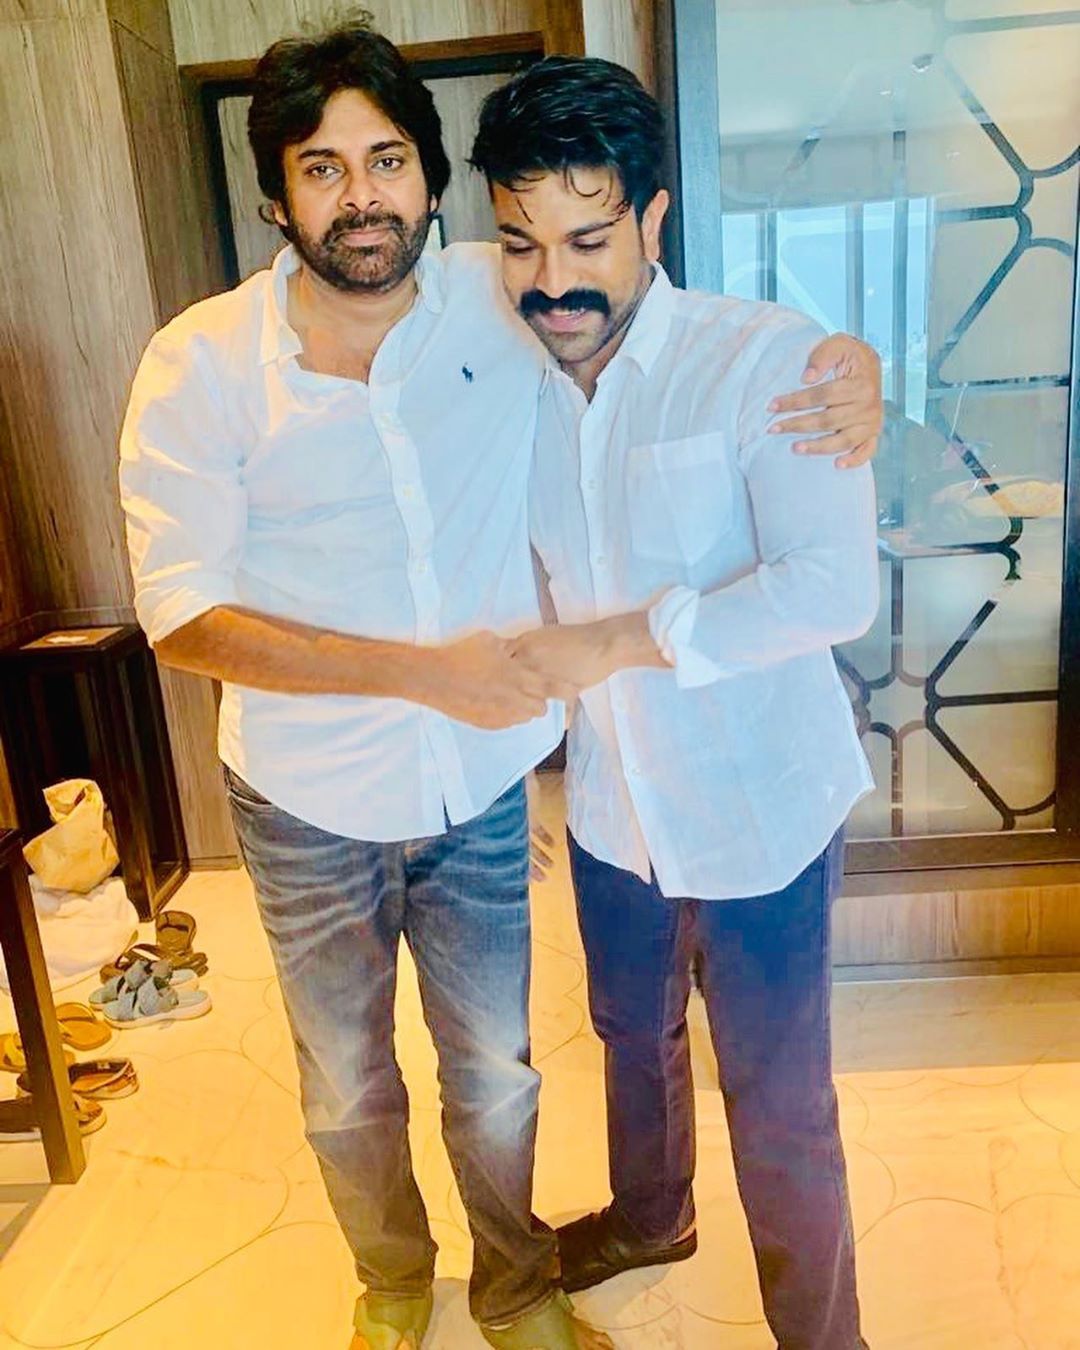 Ram Charan Wishes Pawan Kalyan With A Heartfelt Note On His Birthday, Writes 'Thank You For Always Being There For Me'